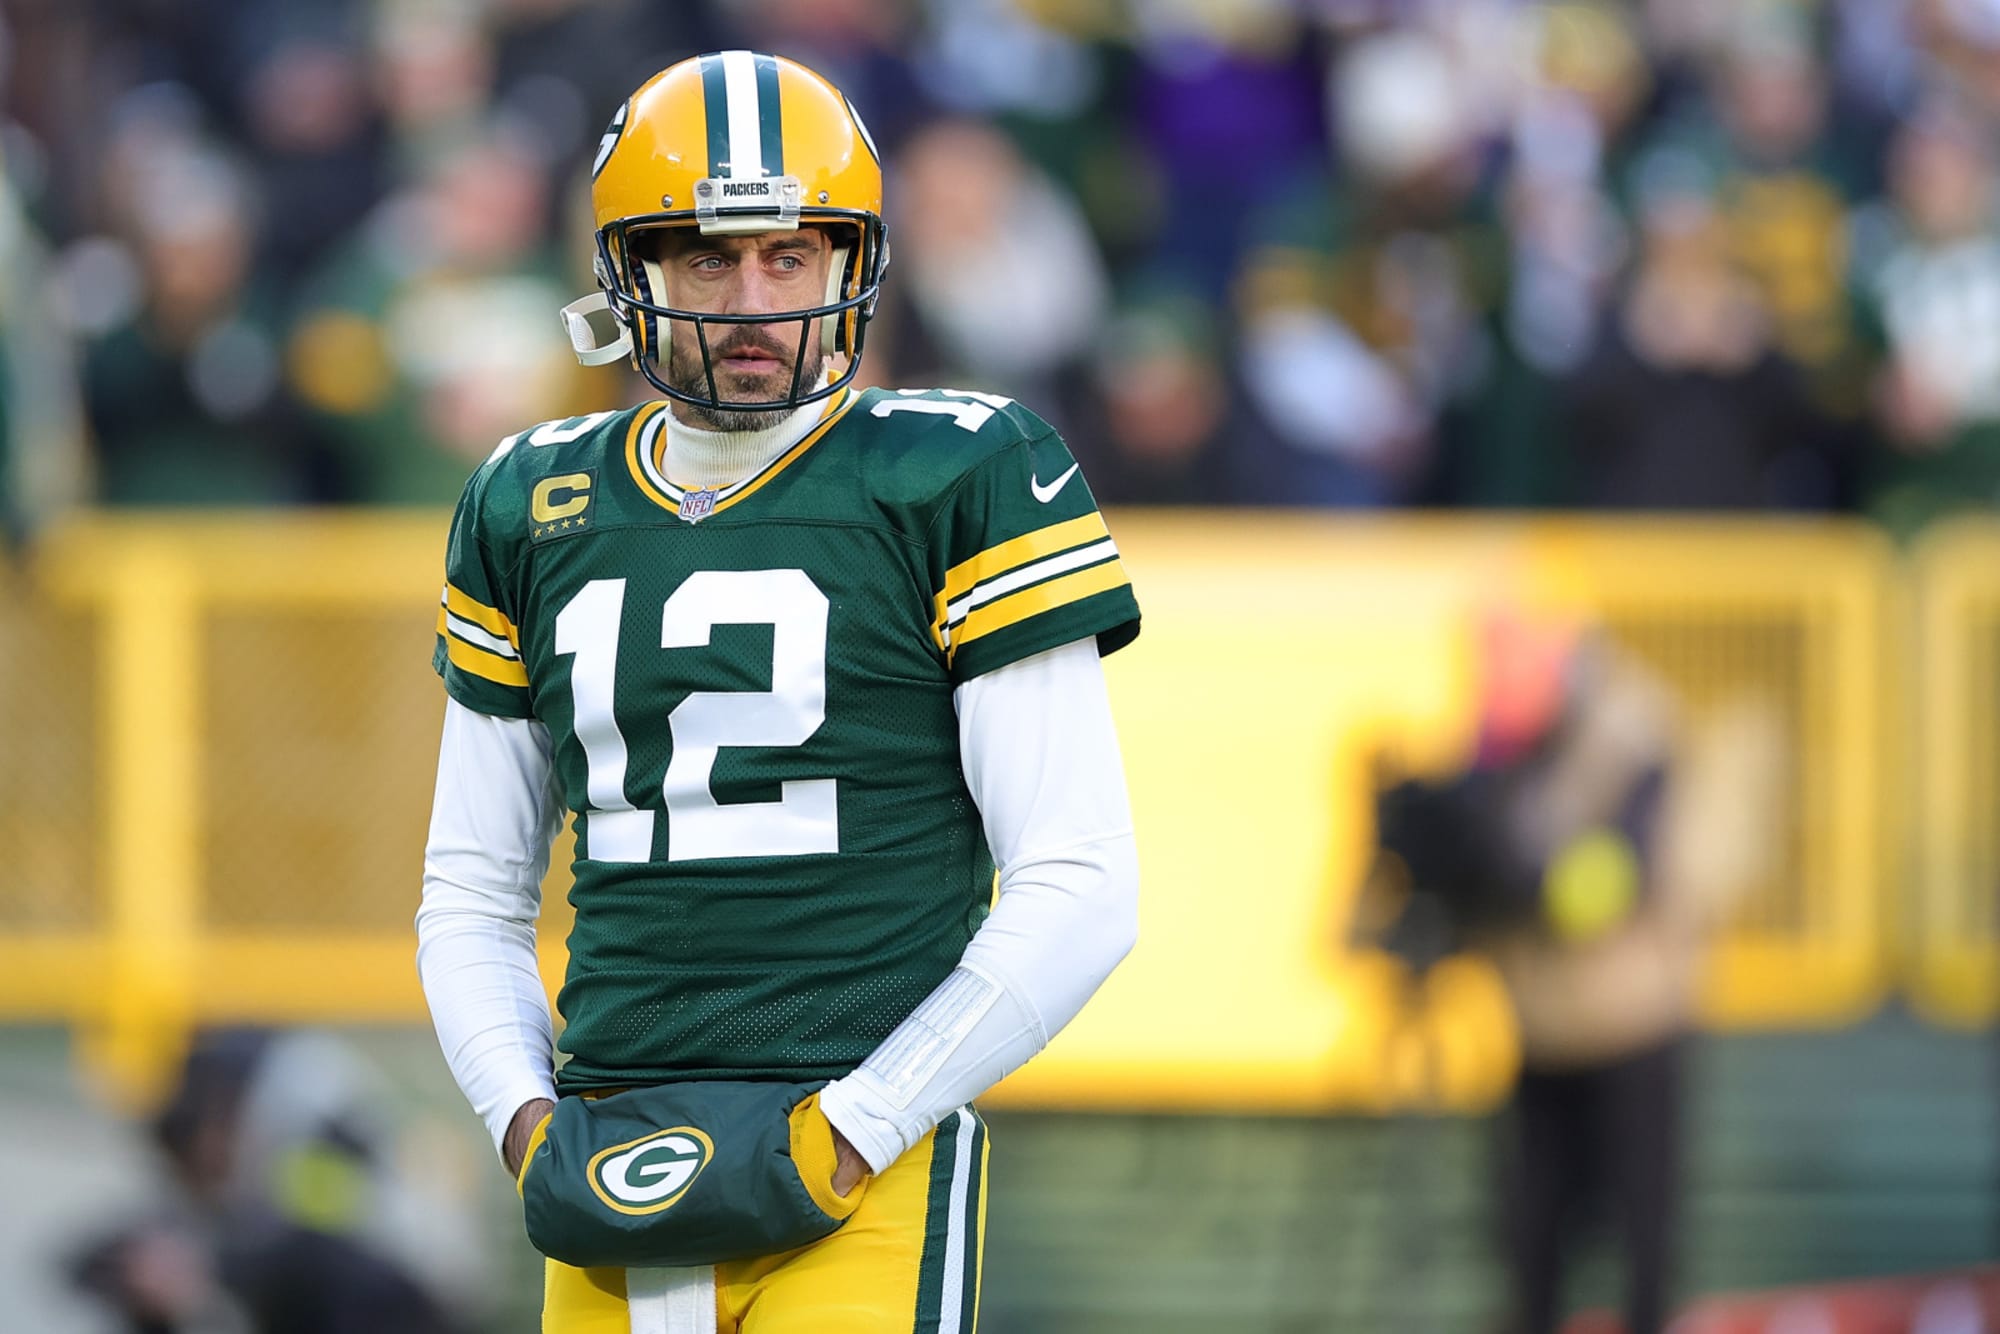 NFL Week 18 scheduling could give Packers major playoff advantage